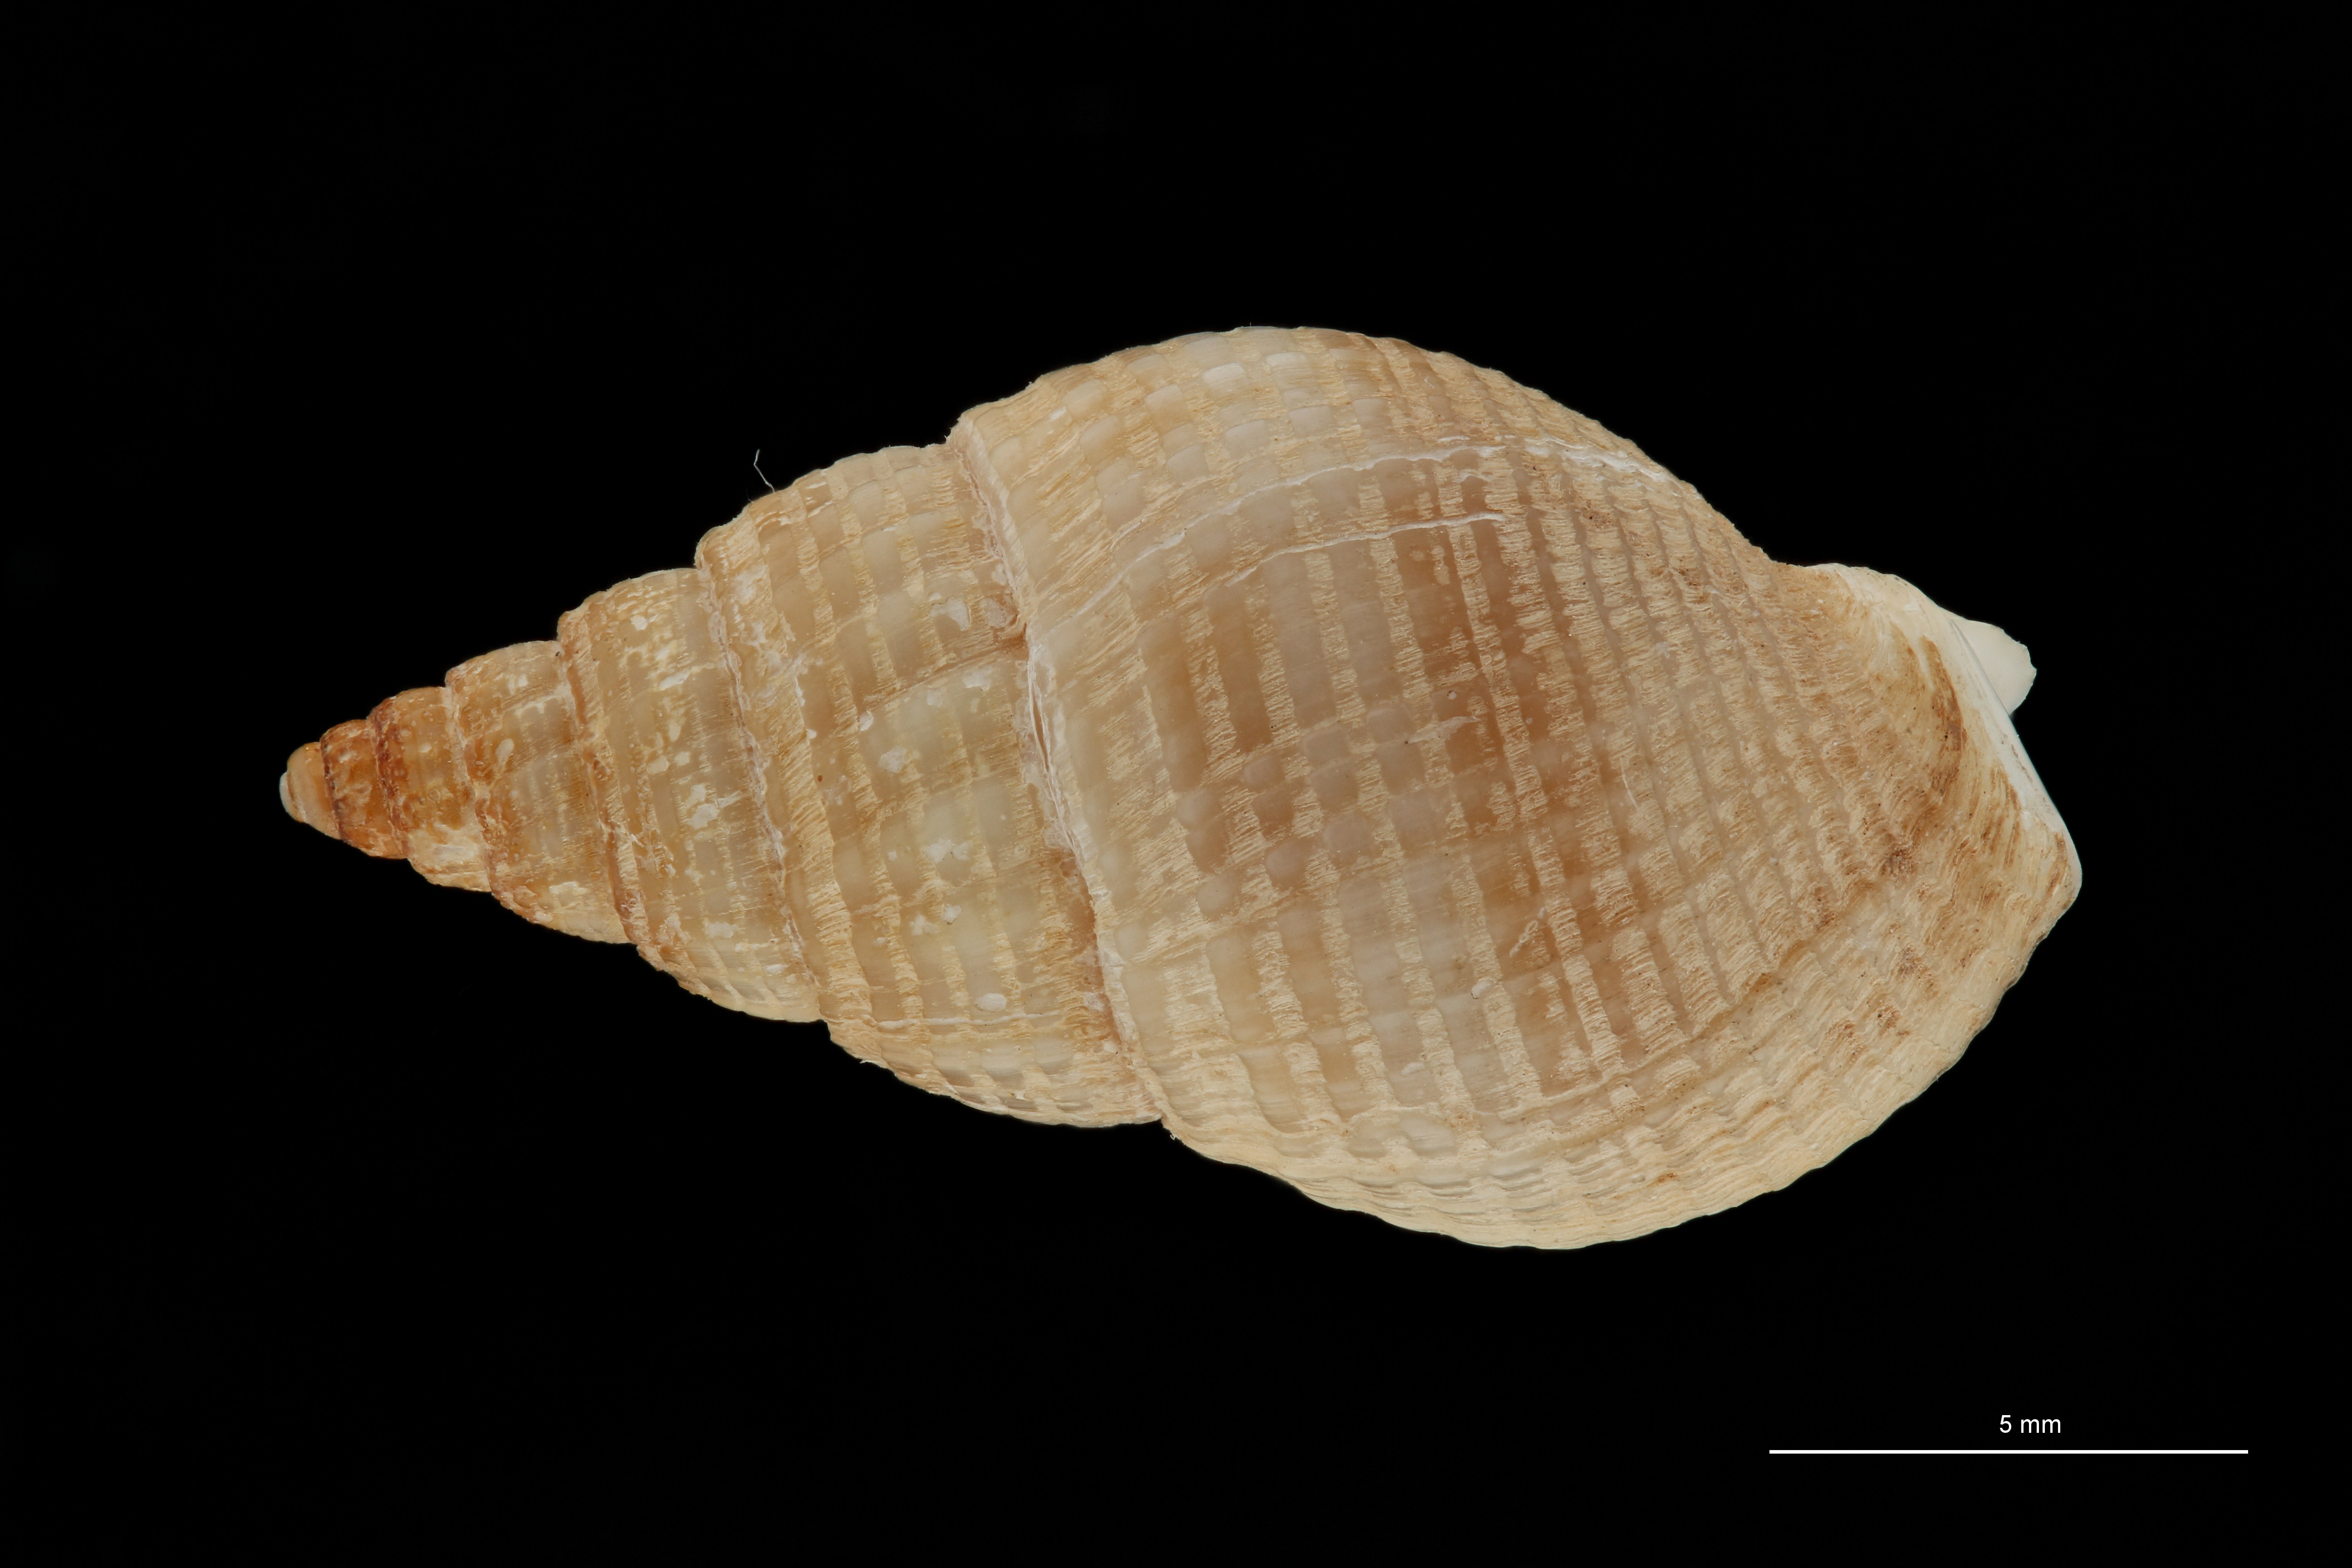 BE-RBINS-INV HYPOTYPE MT 235 Nassarius cabrierensis ovoideus DORSAL ZS PMax Scaled.jpg